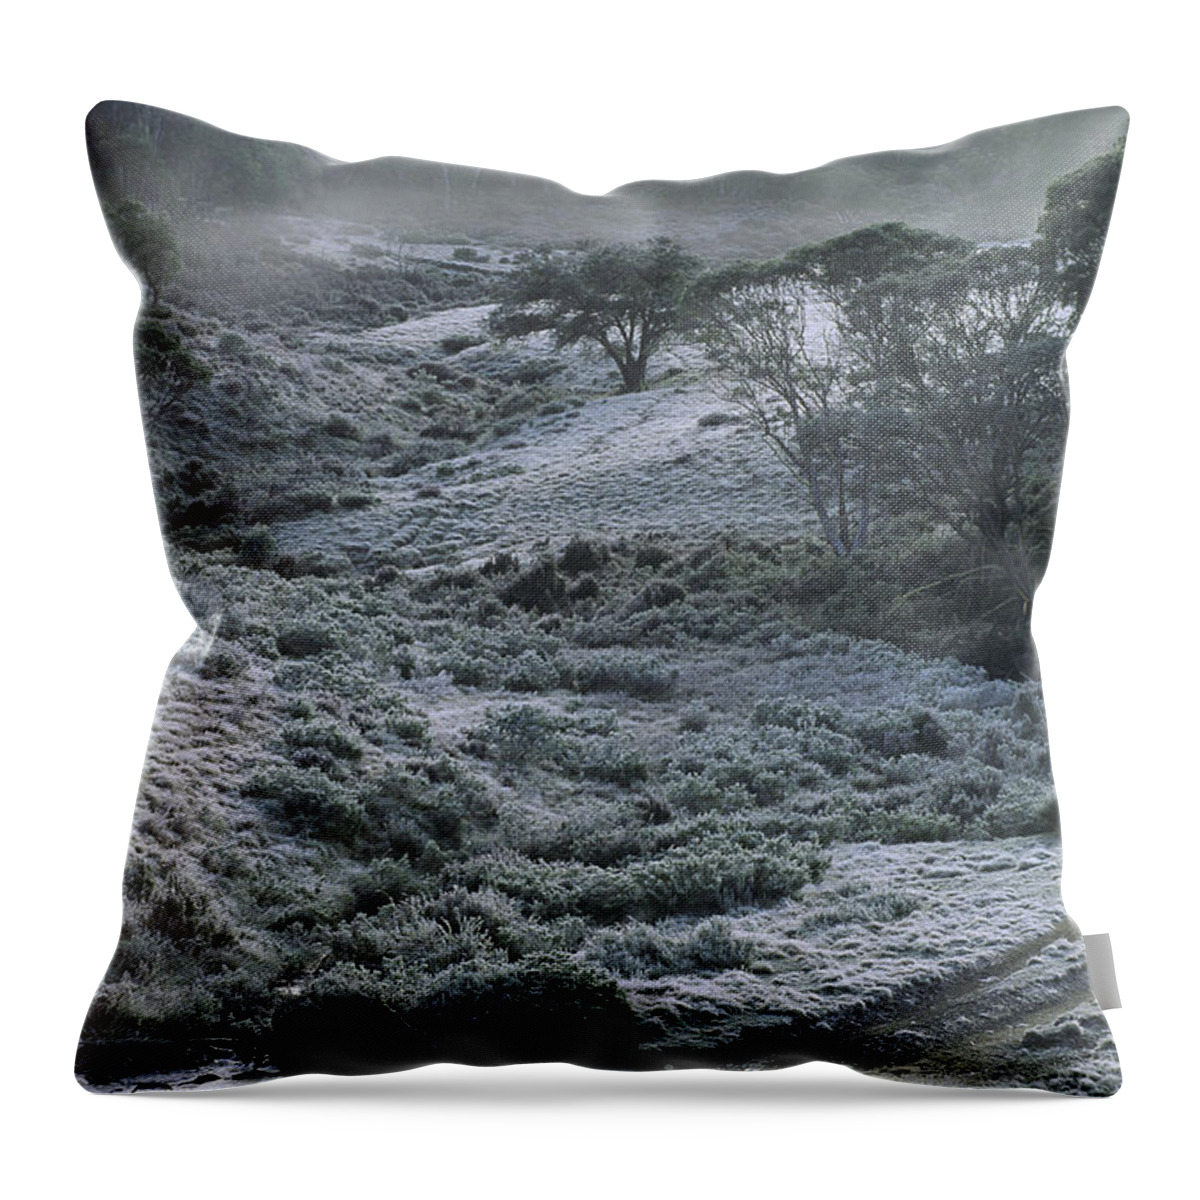 Cattleman Throw Pillow featuring the photograph Cattleman With Horse by Jean-Marc La-Roque